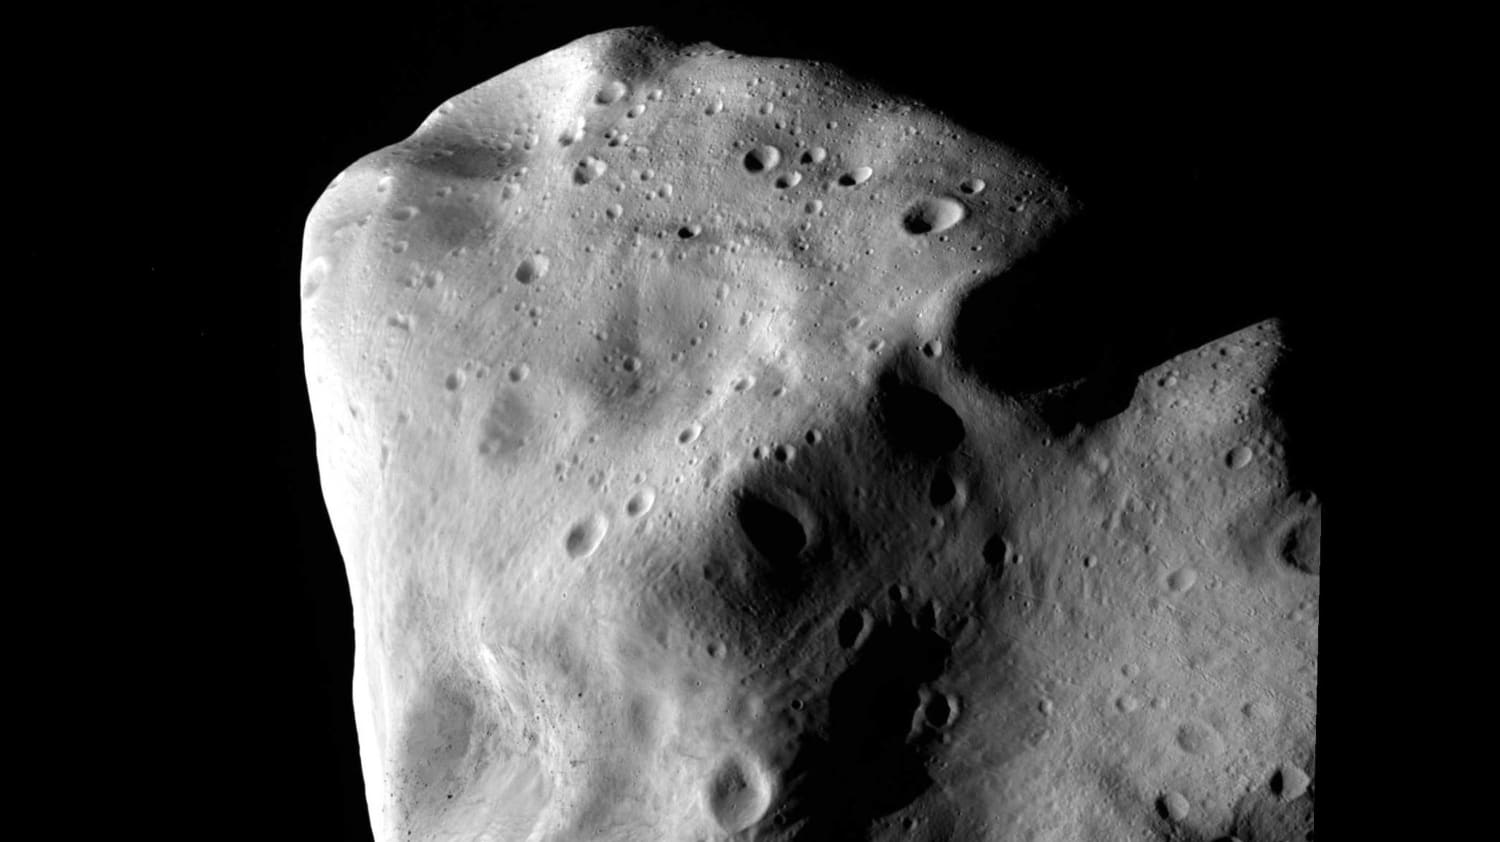 Mark Your Calendars: An Enormous Asteroid Will Fly Past Earth on April 13, 2029